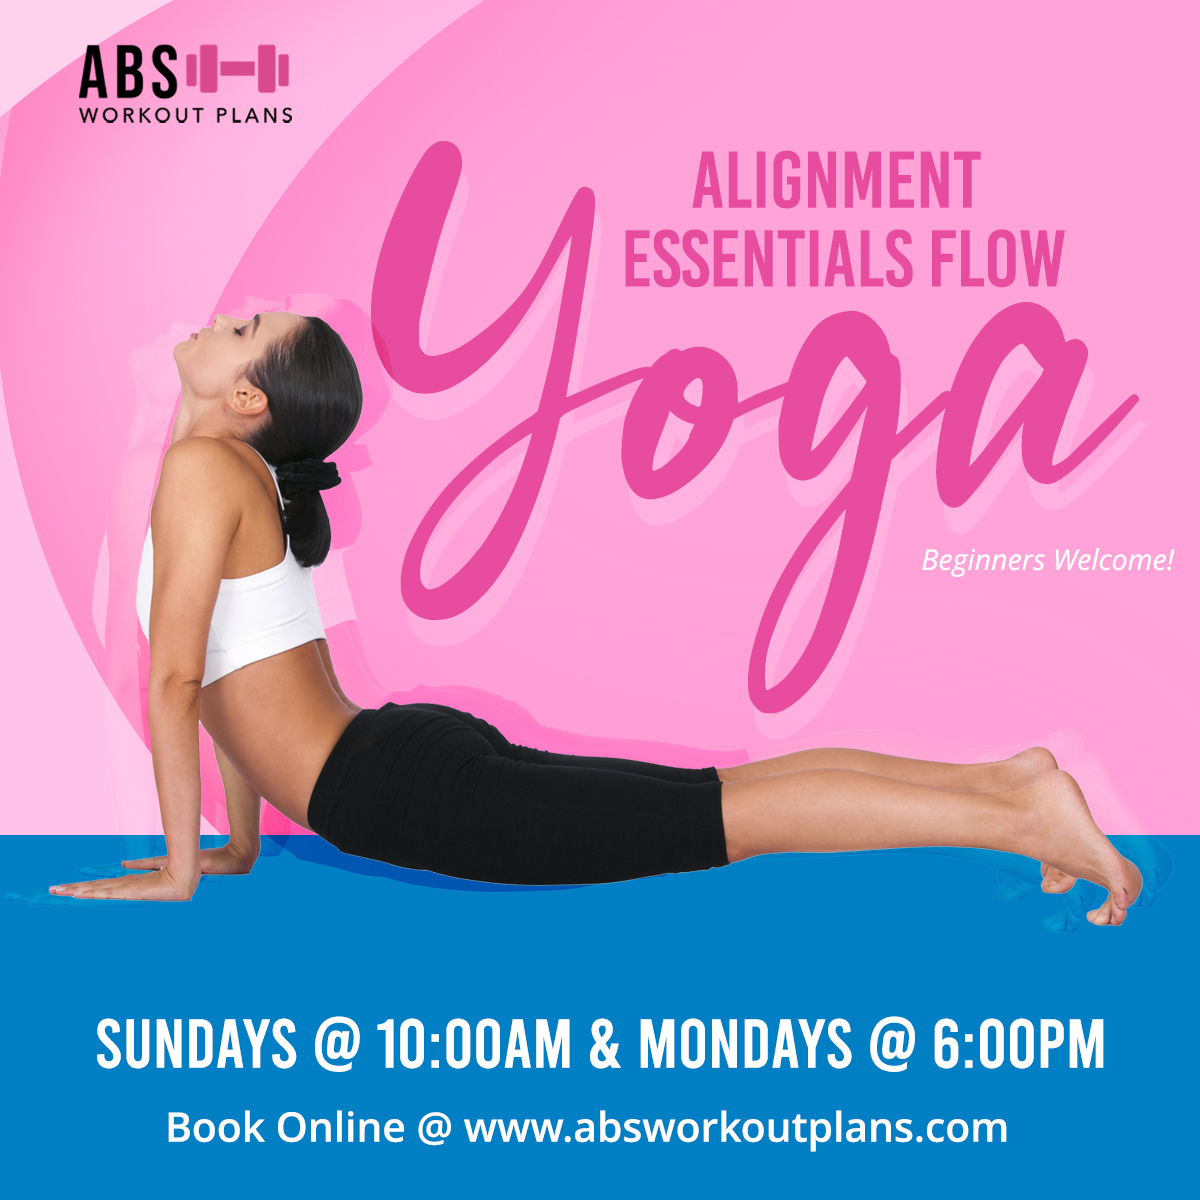 Yoga at Abs Workout Plans